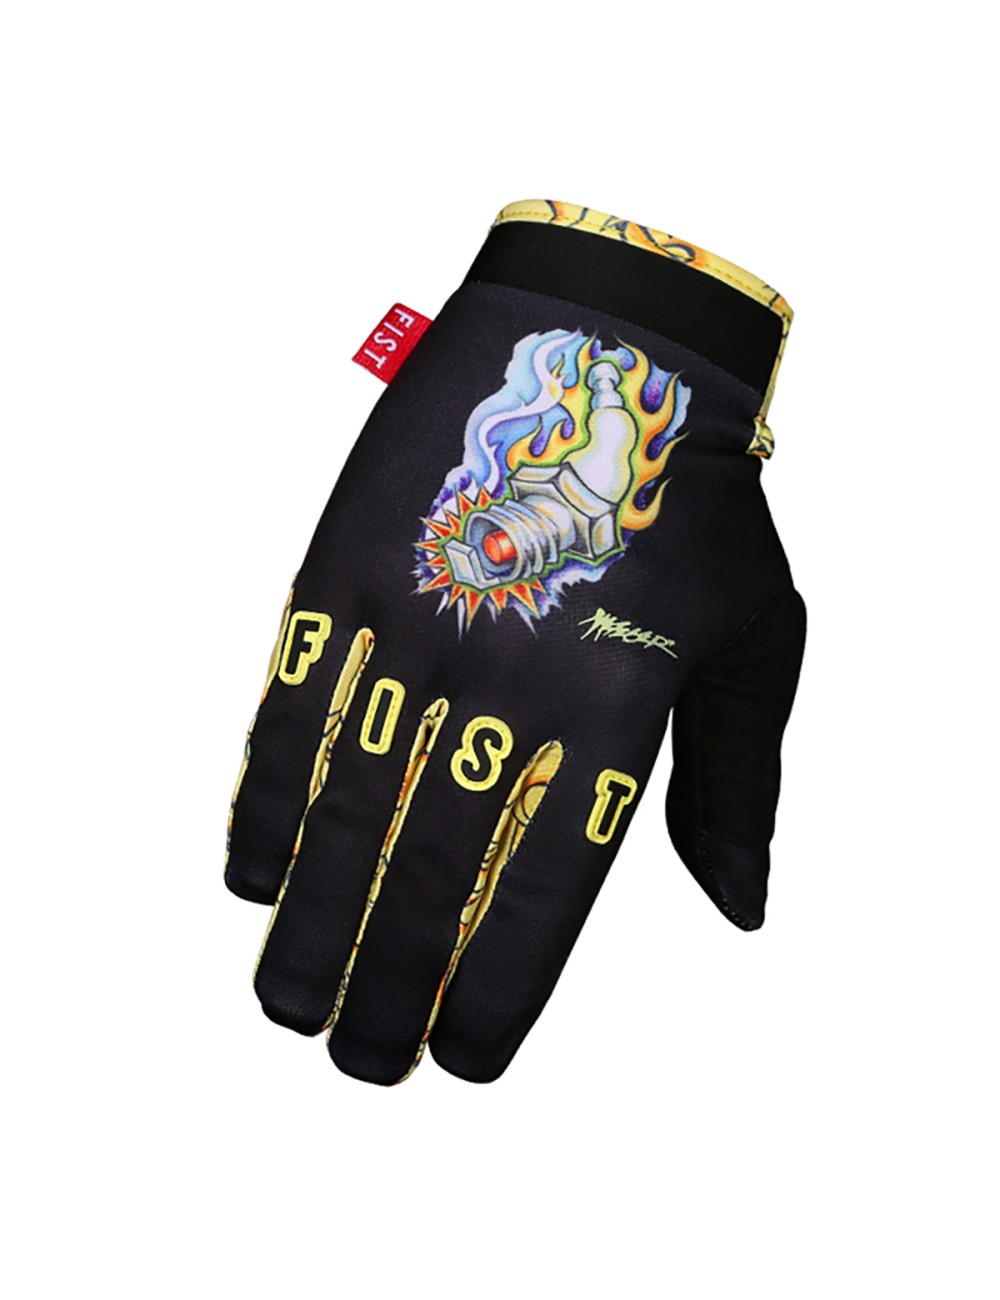 Fist Gloves -  Mike Metzger_14416